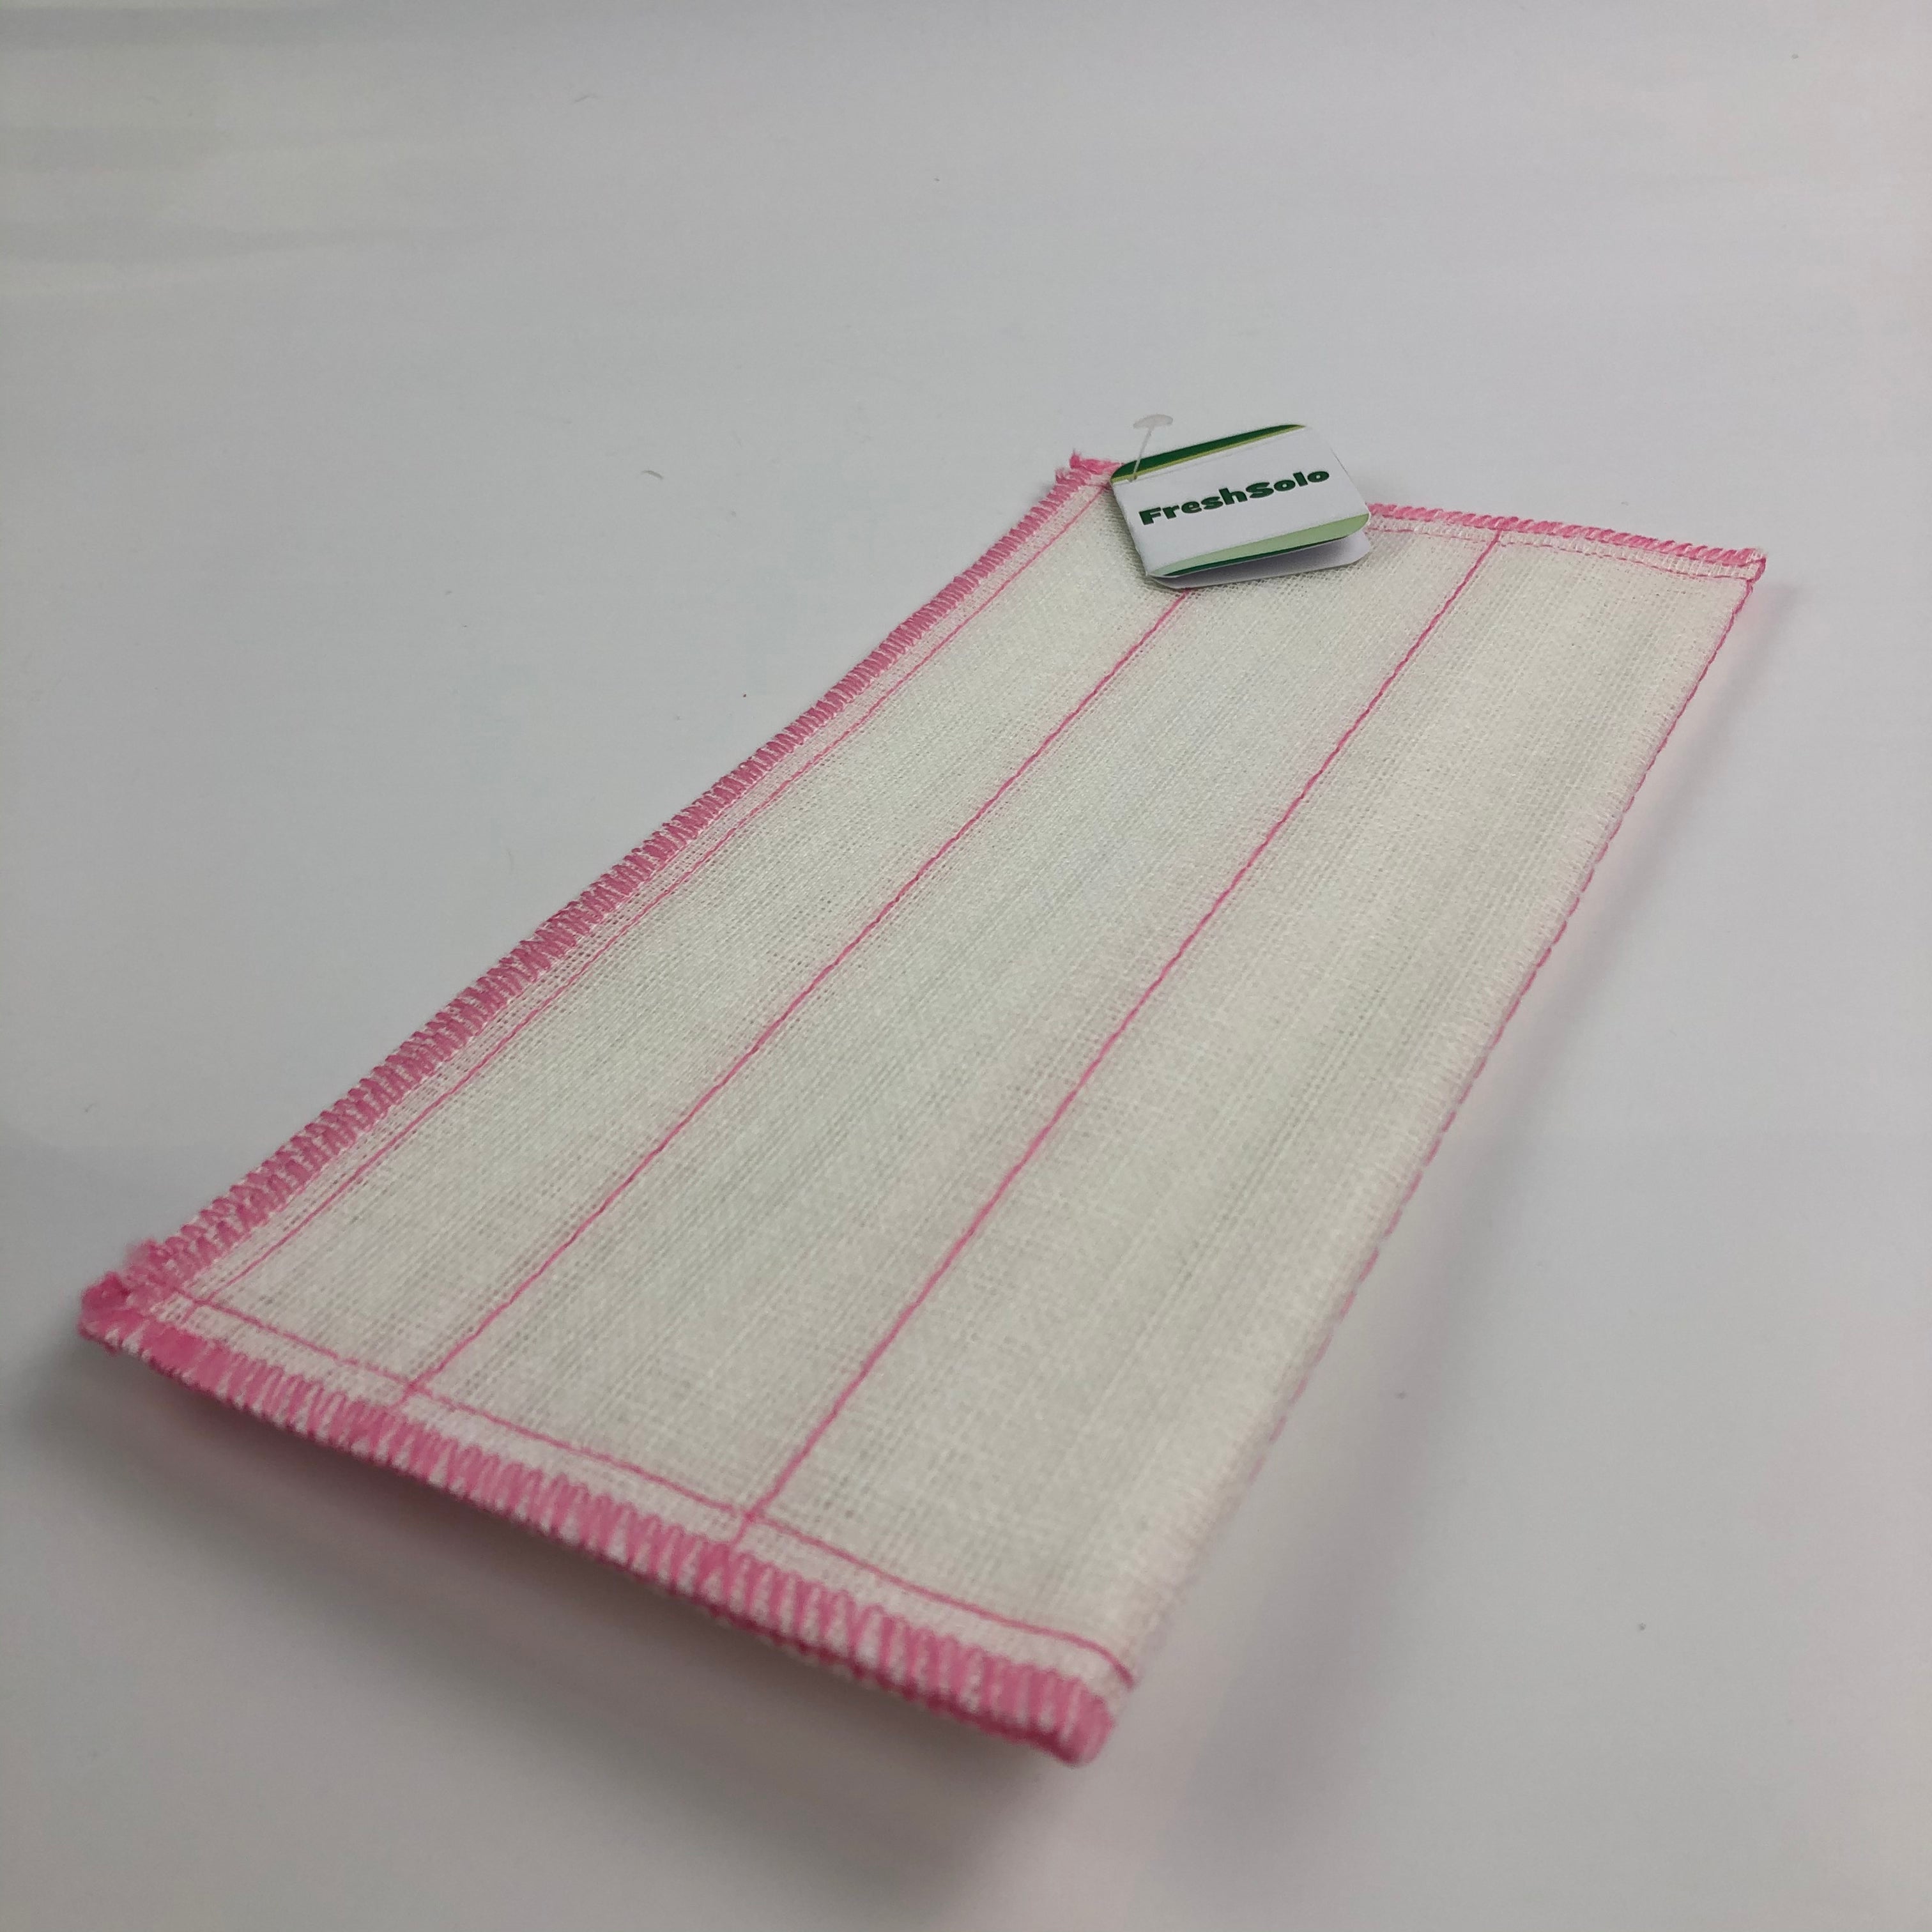 FreshSolo Microfiber Cleaning Cloths - Glow Guards